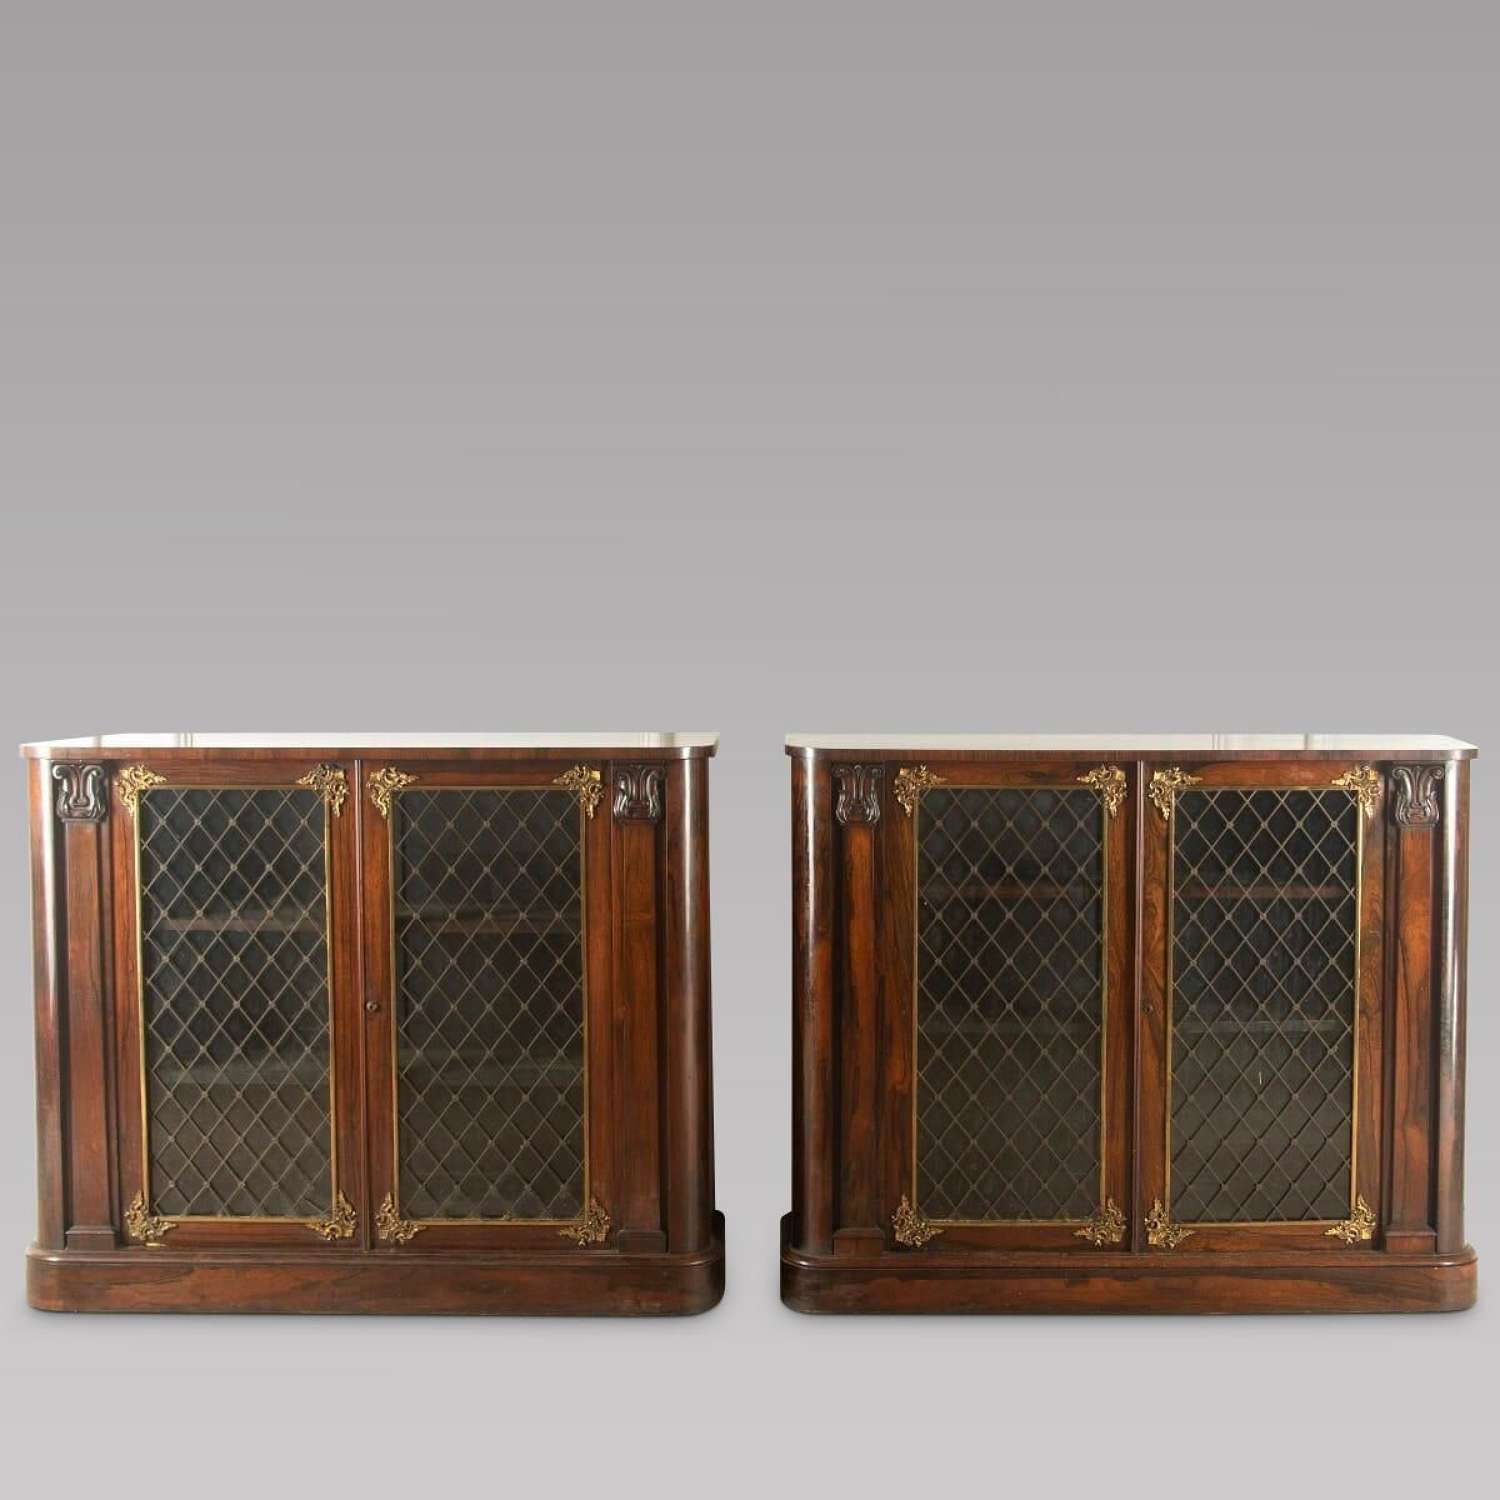 Pair of Early 19th Century Rosewood Chiffoniers